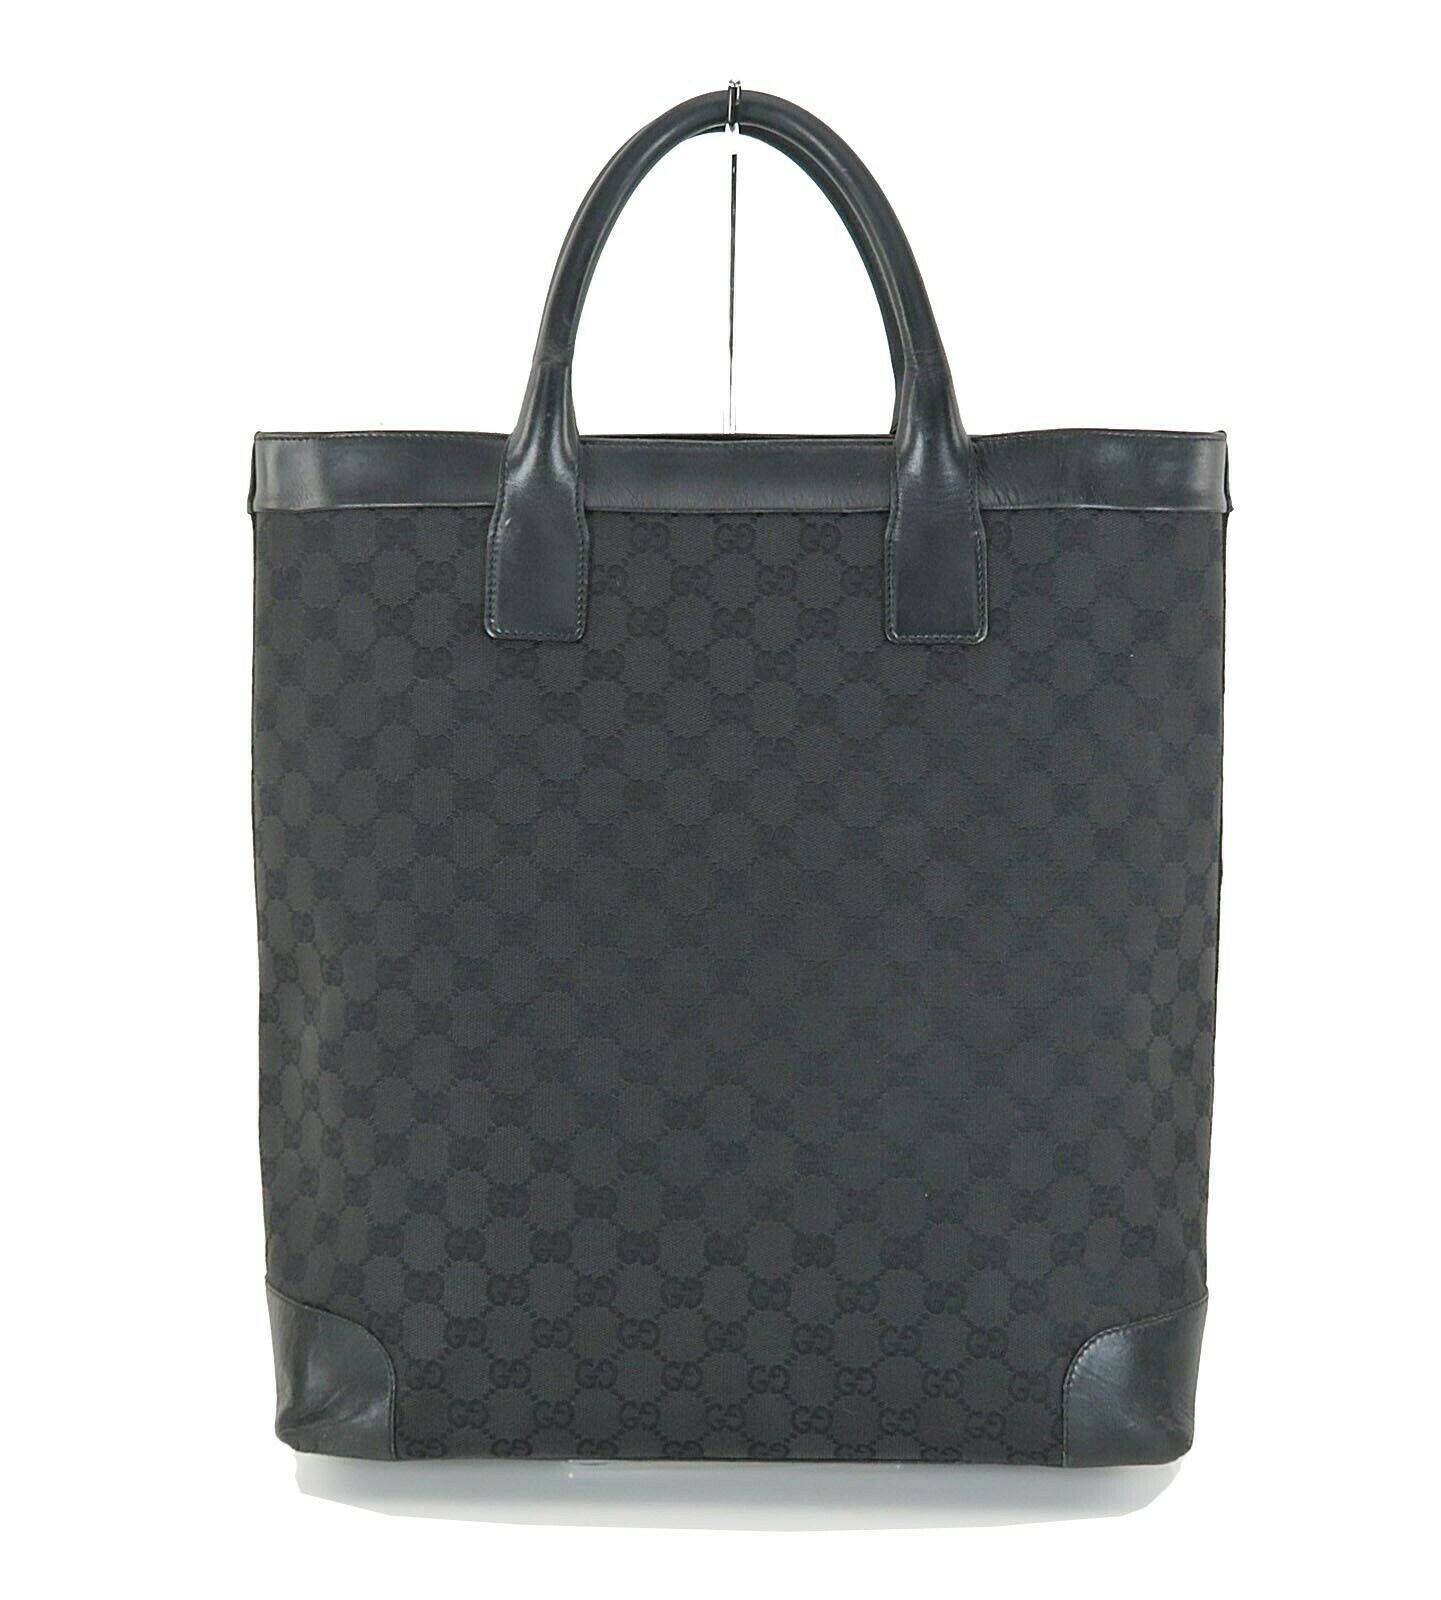 Authentic GUCCI Black GG Canvas and Leather Tote Bag Purse #73337 - Women&#39;s Bags & Handbags